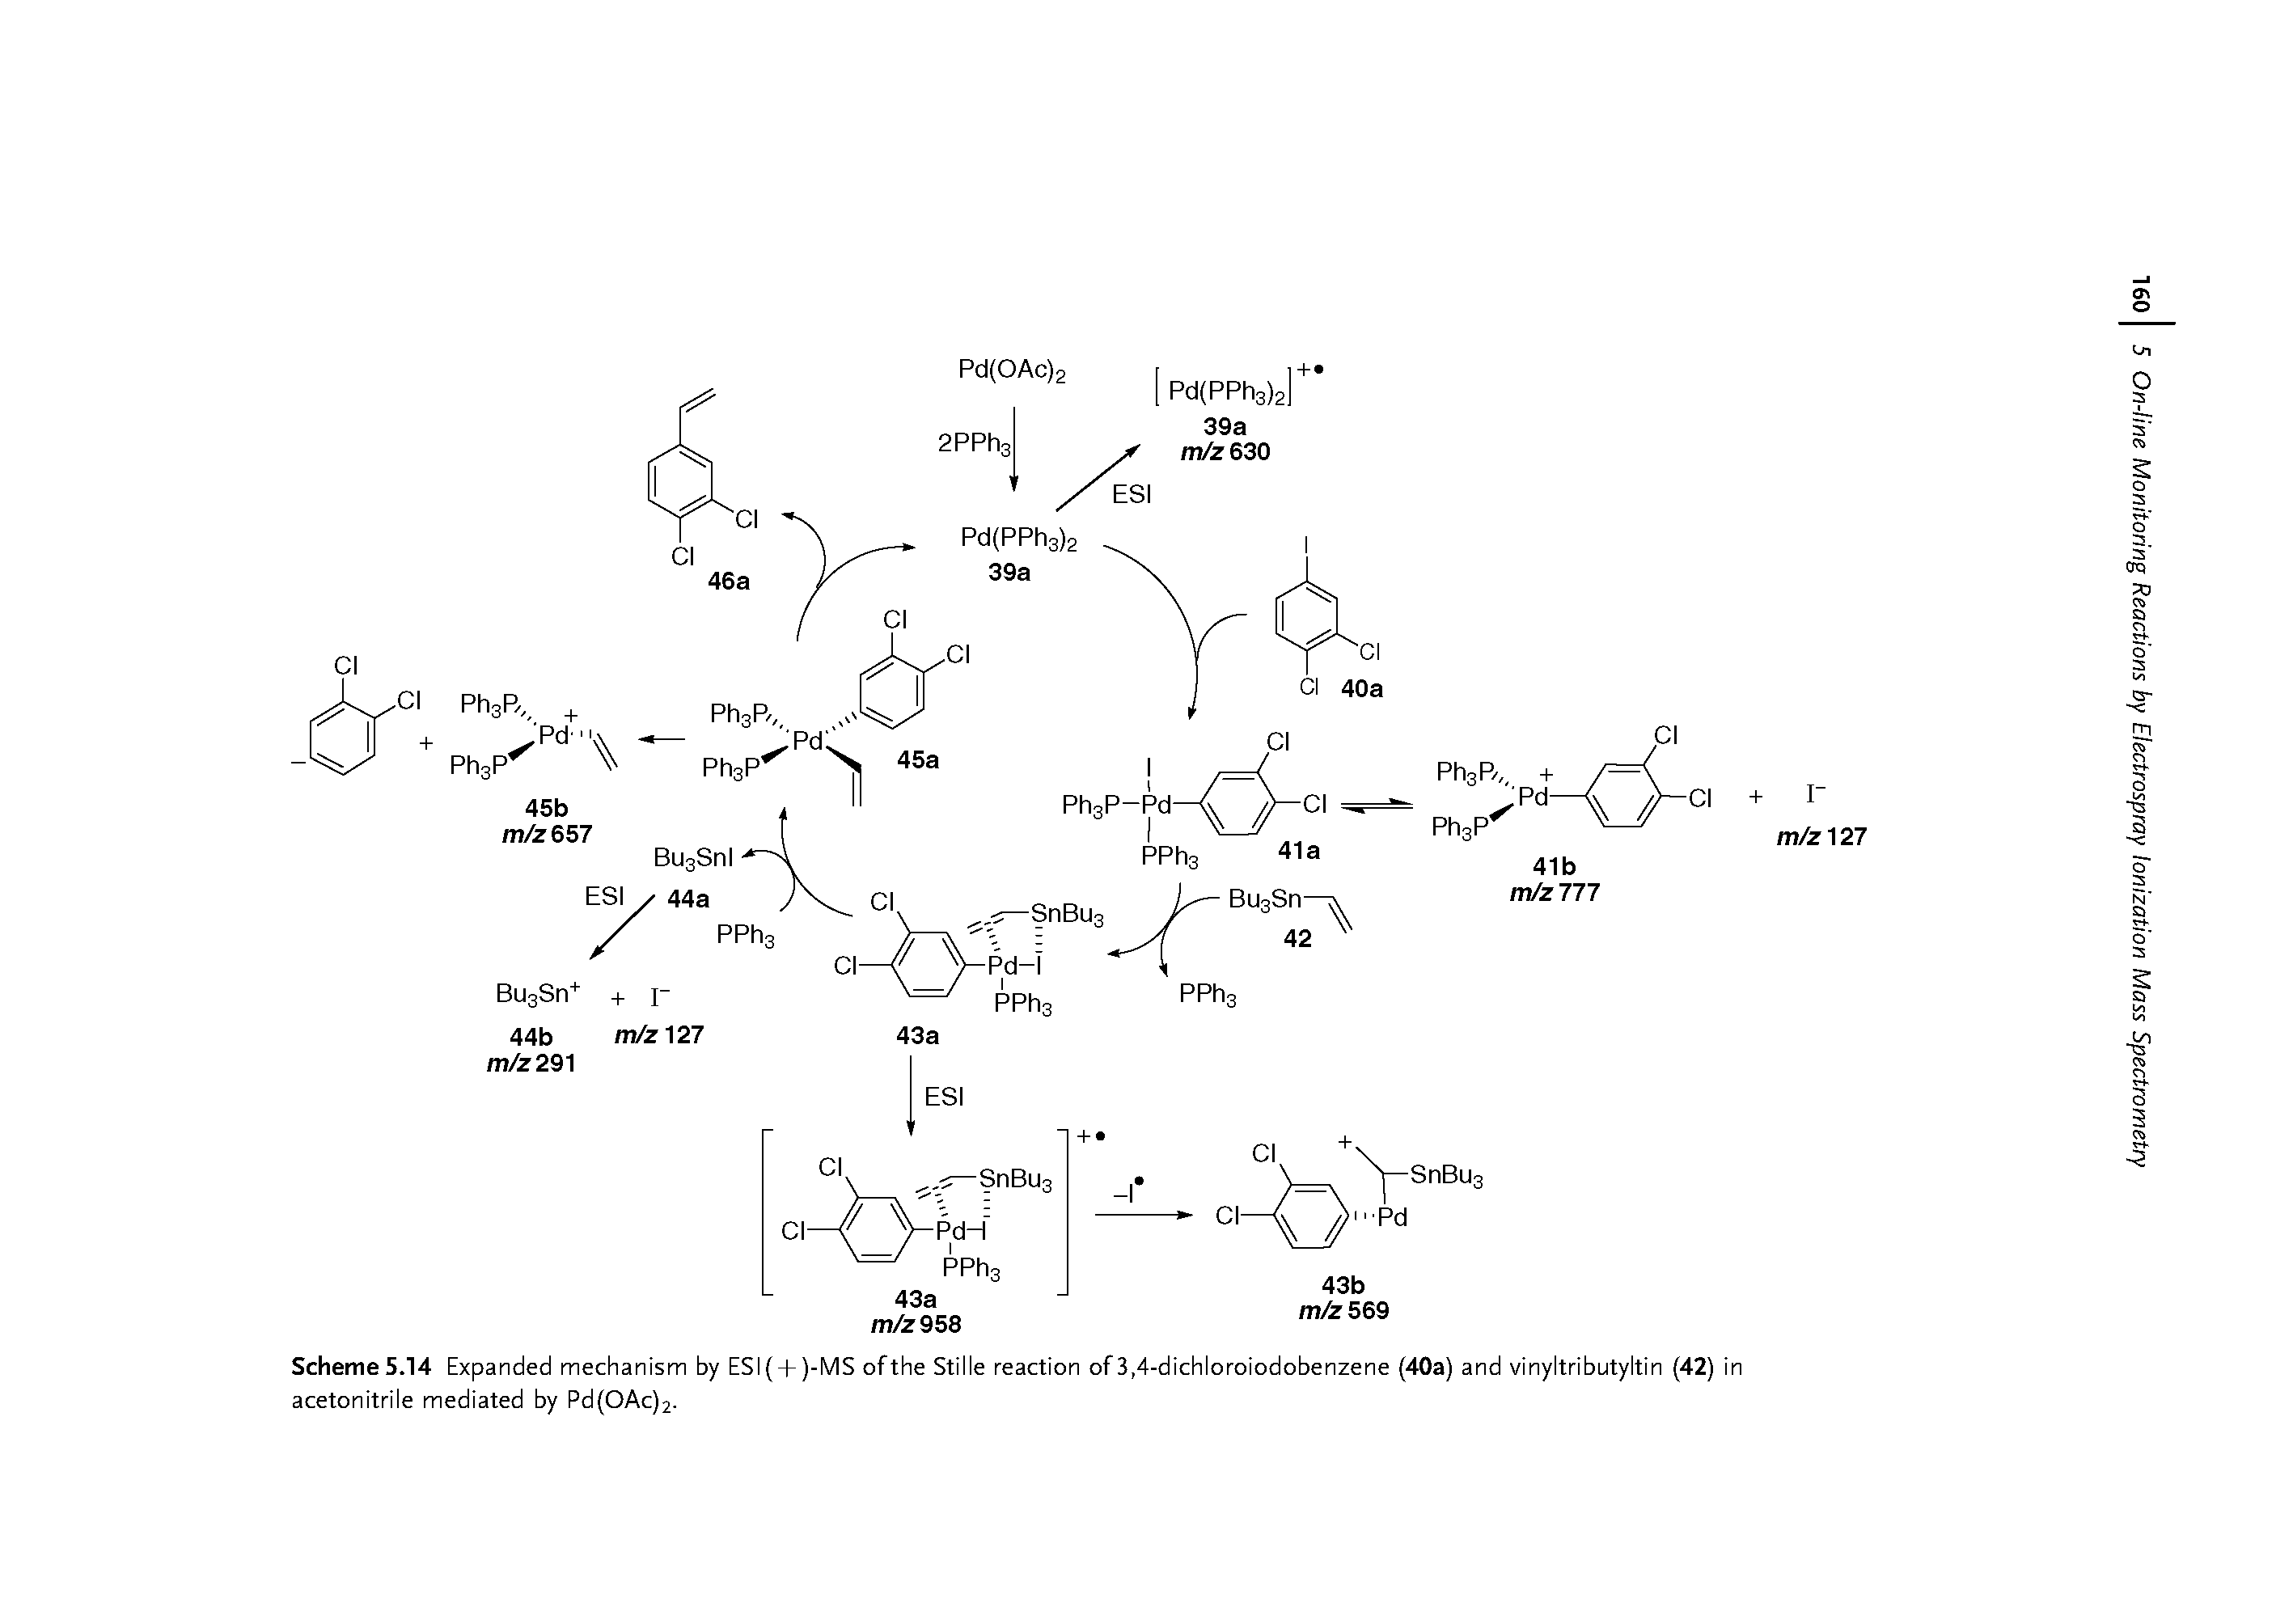 Scheme5.14 Expanded mechanism by ESI( + )-MS ofthe Stille reaction of3,4-dichloroiodobenzene (40a) and vinyltributyltin (42) in acetonitrile mediated by Pd(OAc)2.